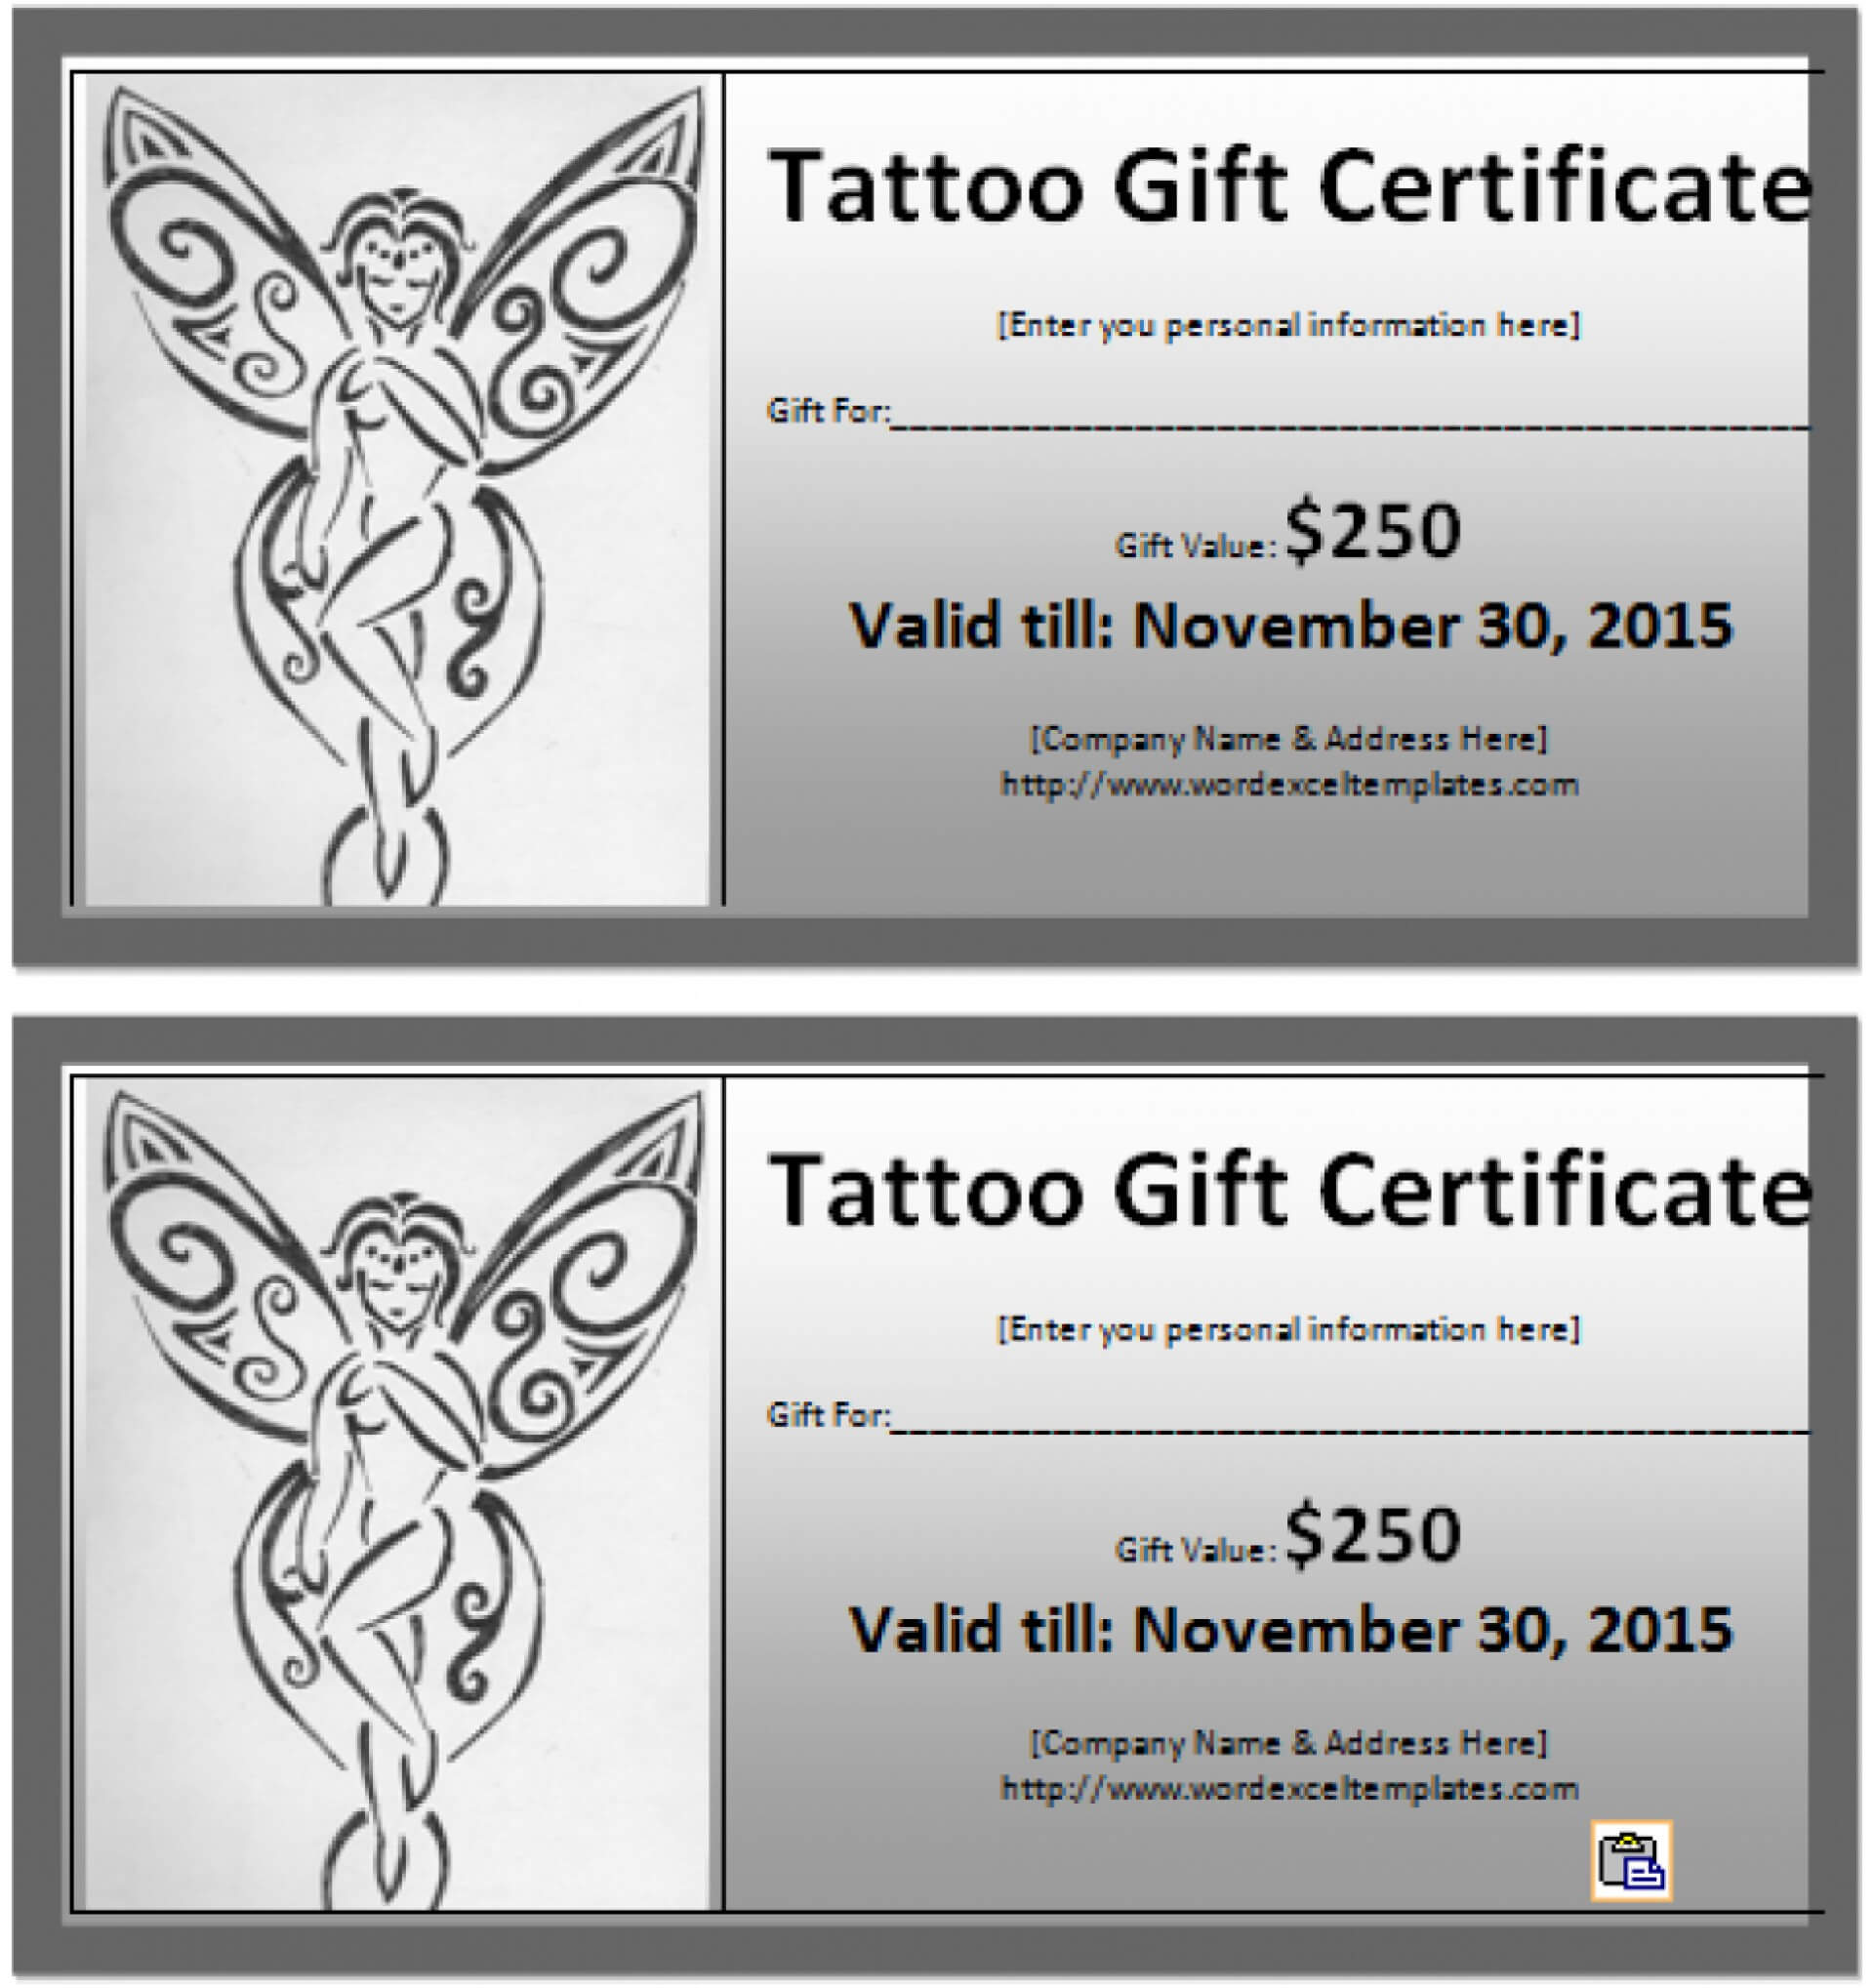 031 Free Printable Gift Certificates Restaurant Ideas Model Intended For Tattoo Gift Certificate Template